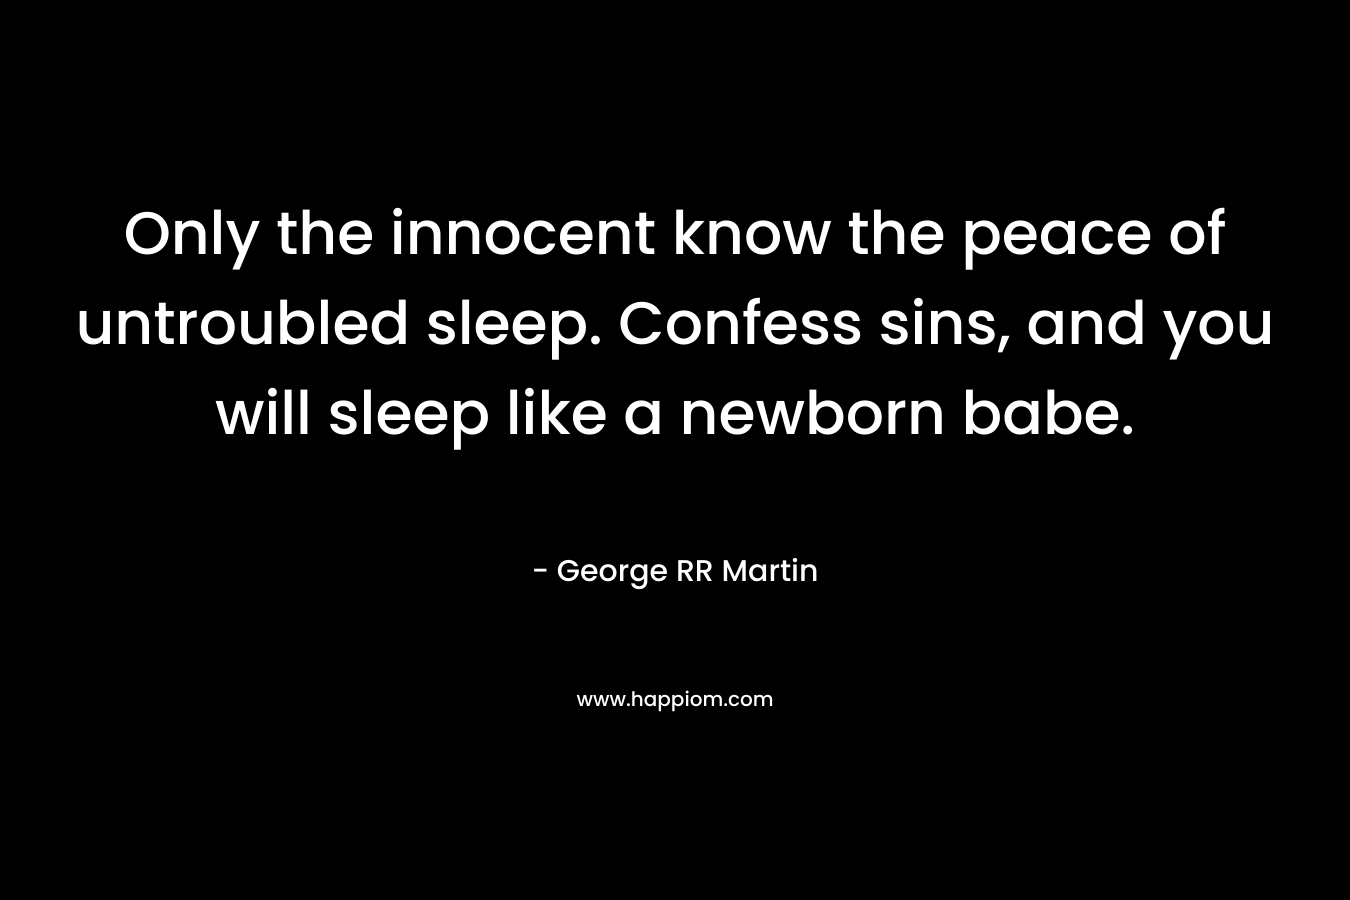 Only the innocent know the peace of untroubled sleep. Confess sins, and you will sleep like a newborn babe.